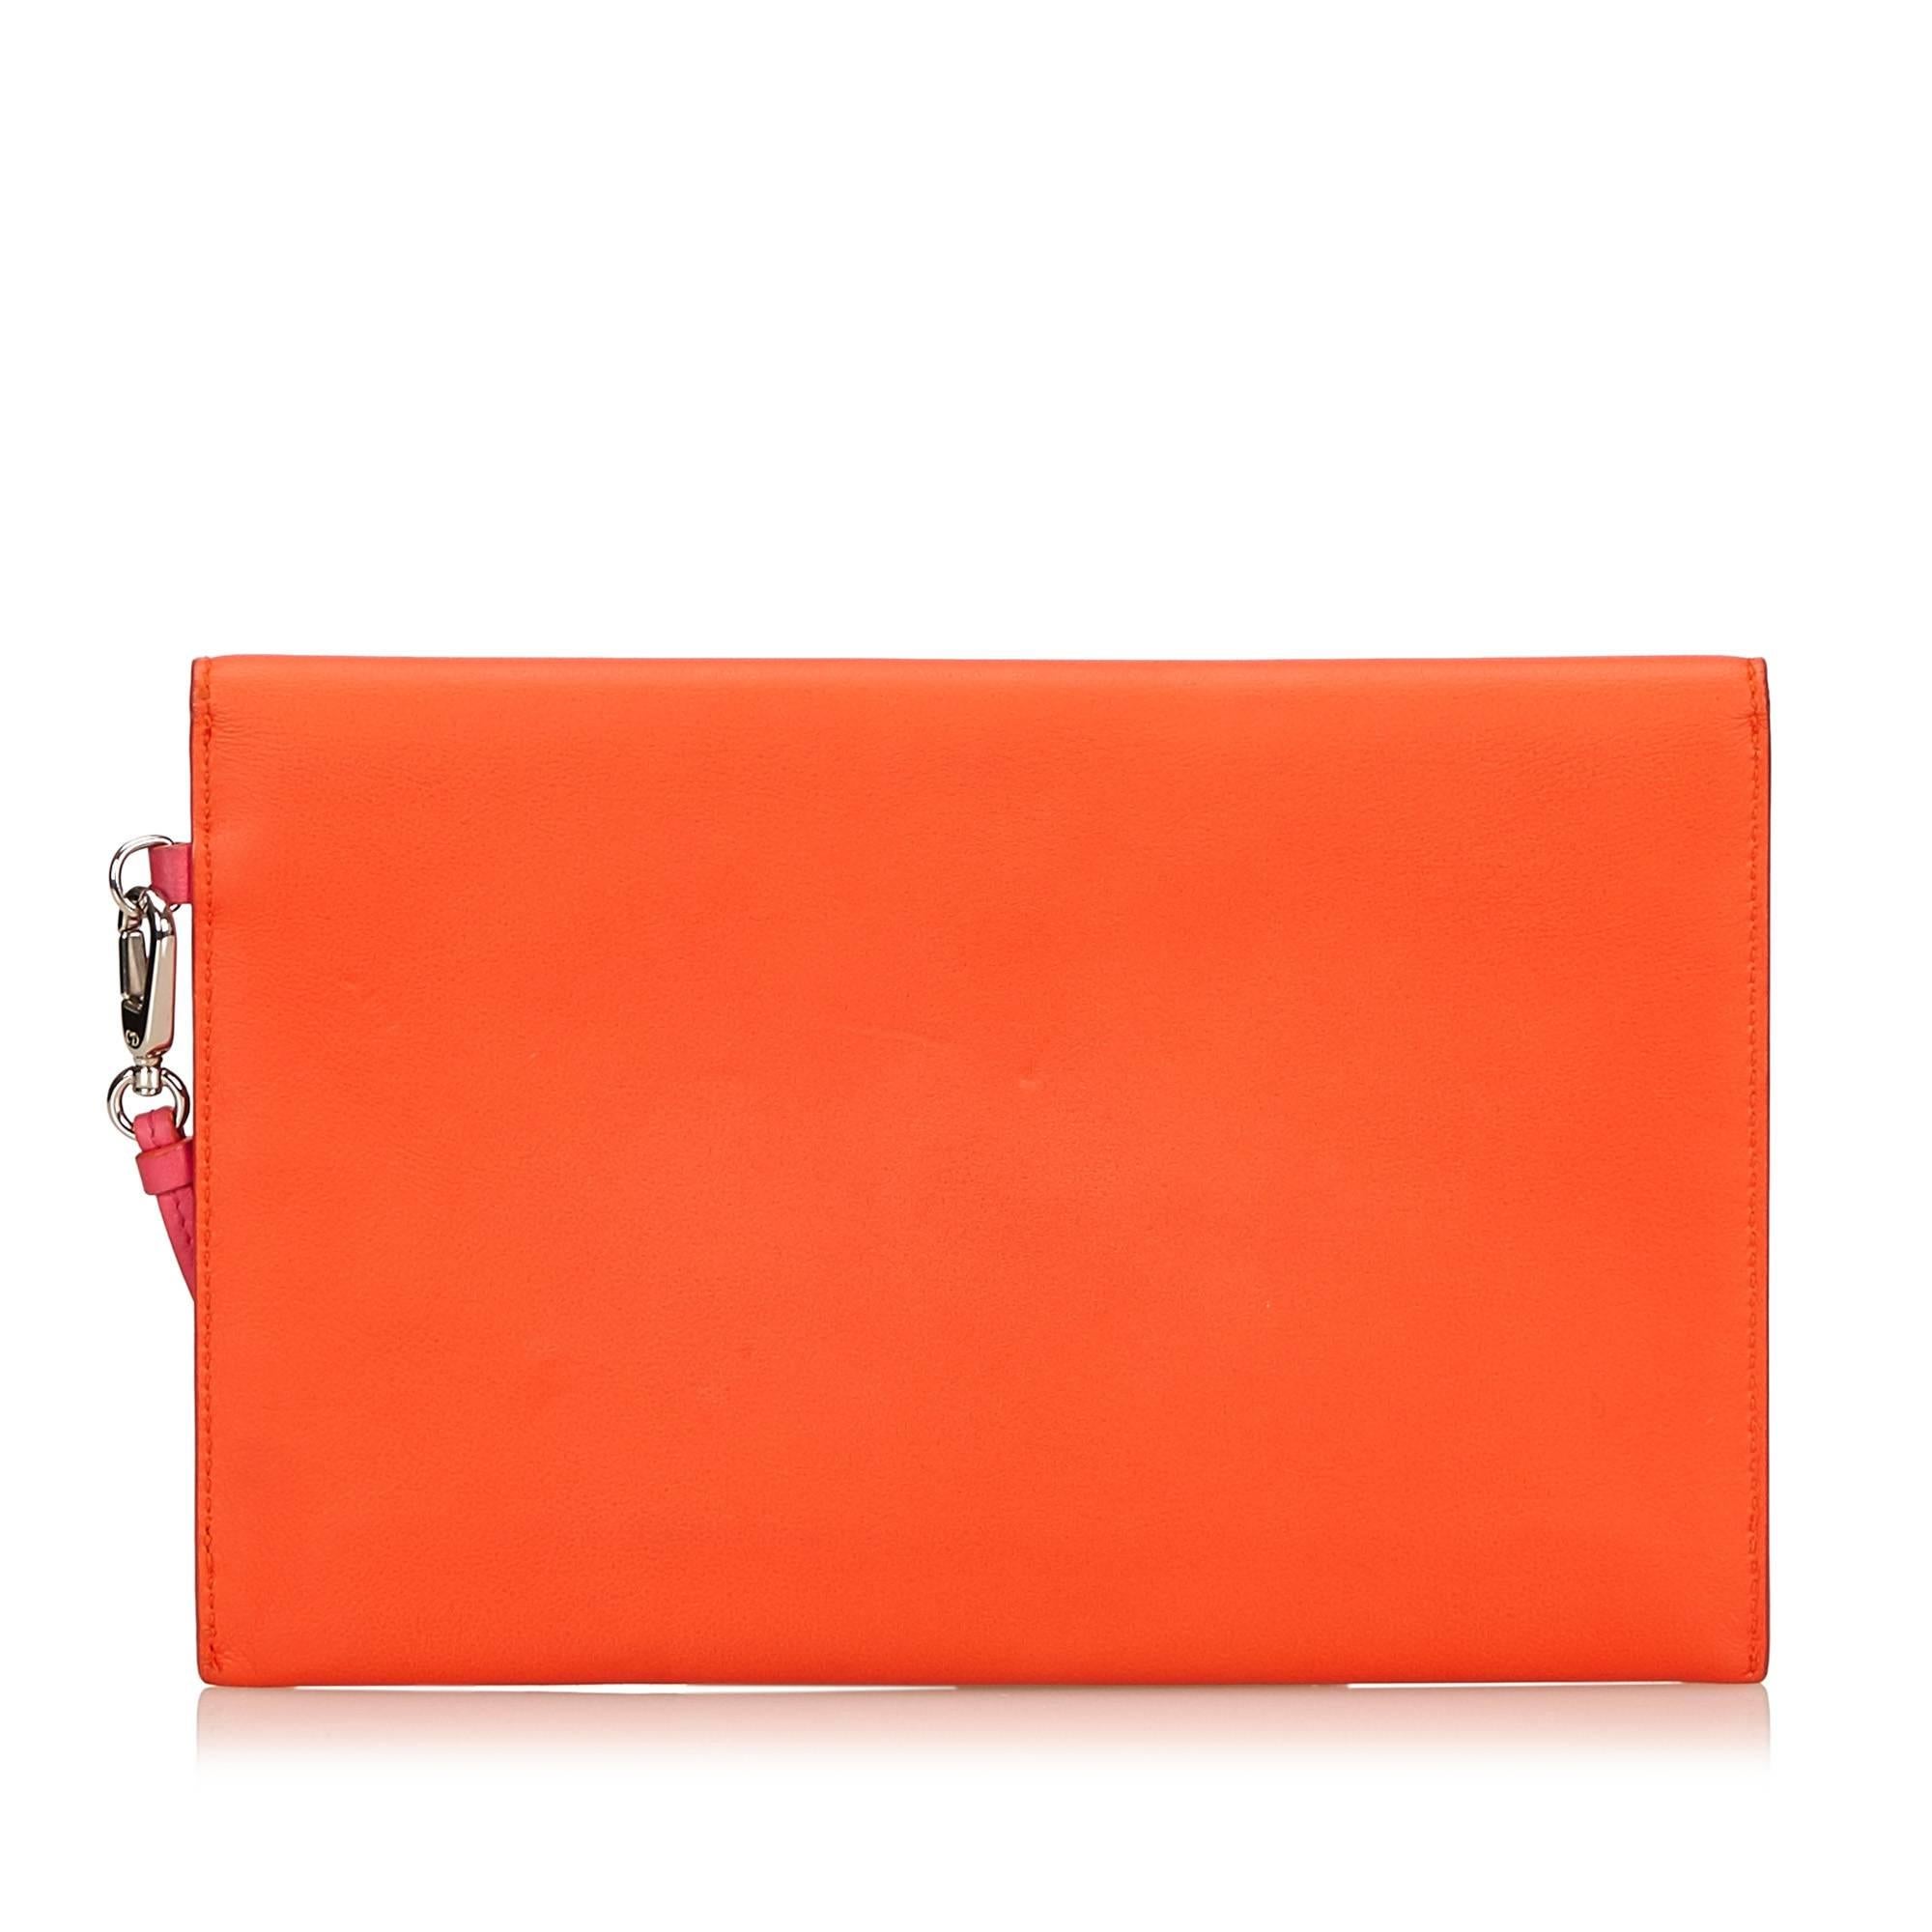 Red Christian Dior Orange and Pink Leather Clutch Bag 